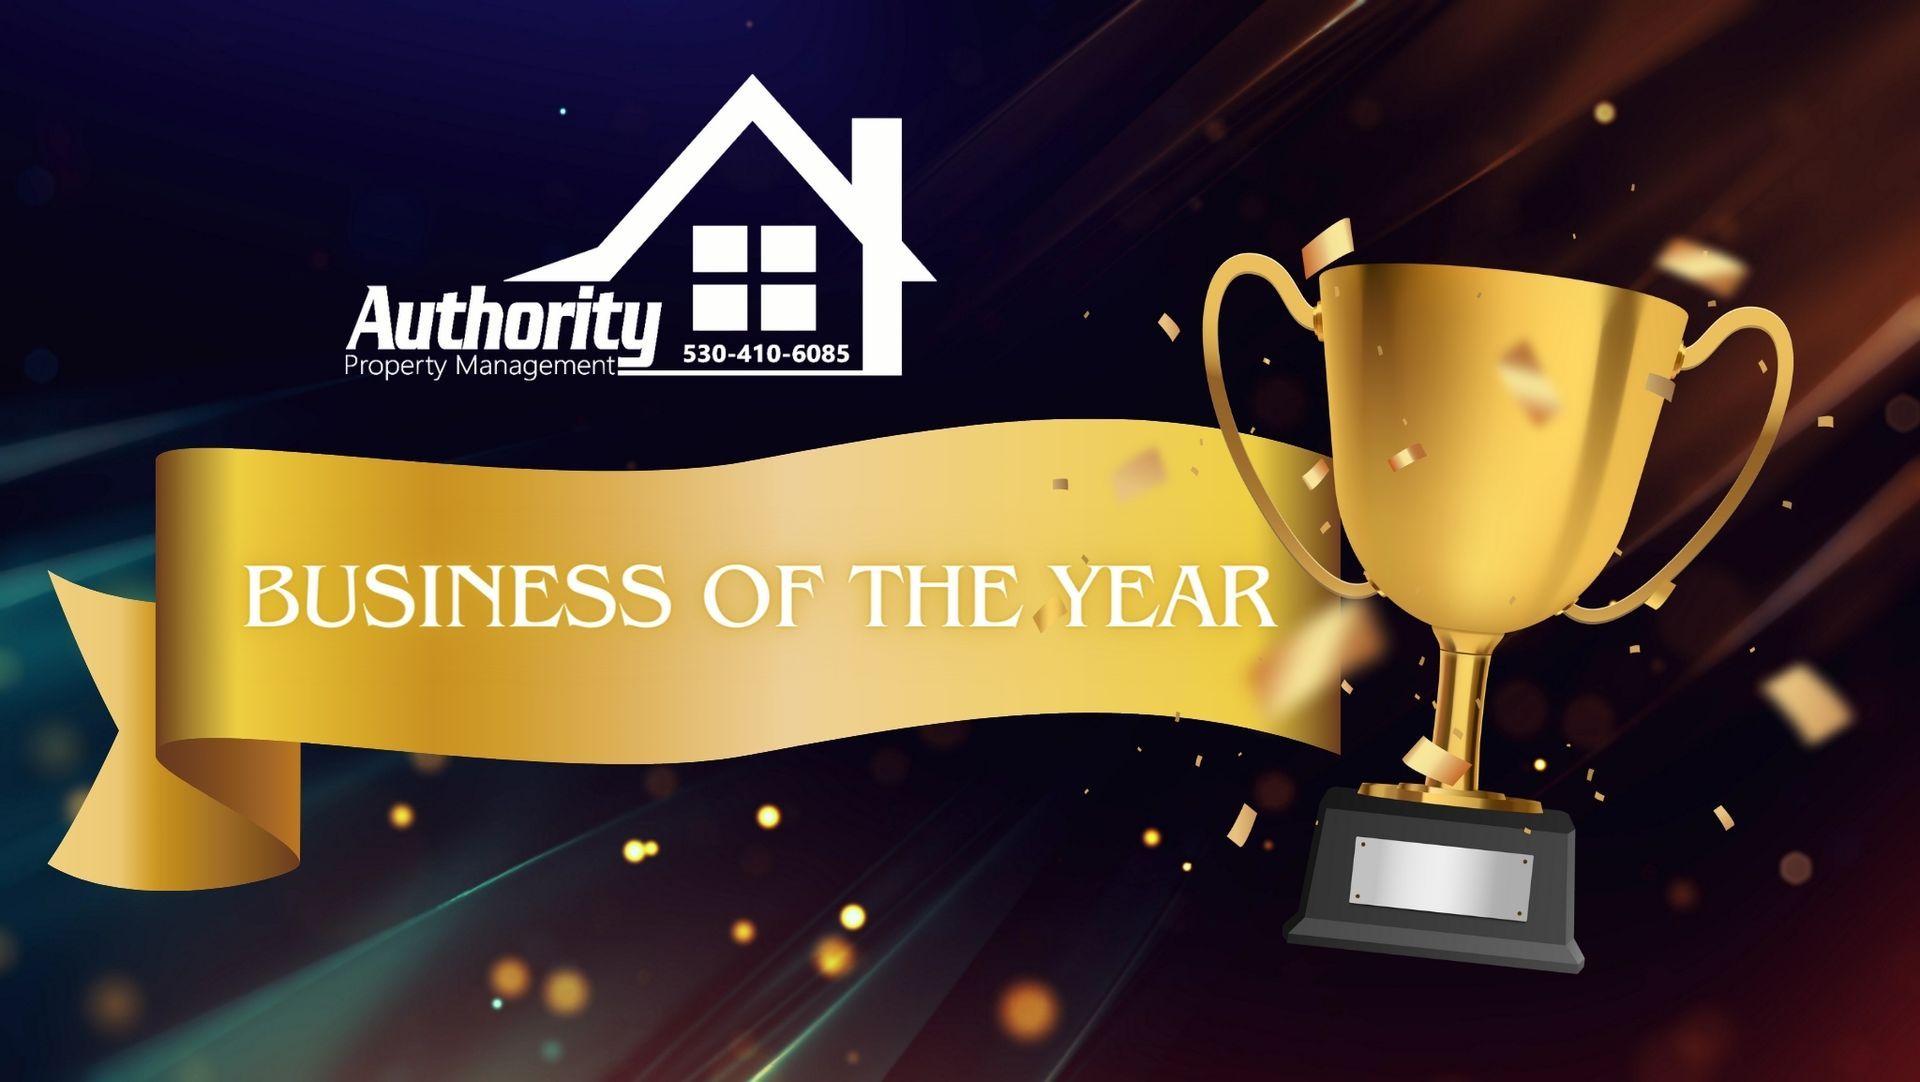 Authority Property Management Voted Best Business by The Redding Chamber Of Commerce. 